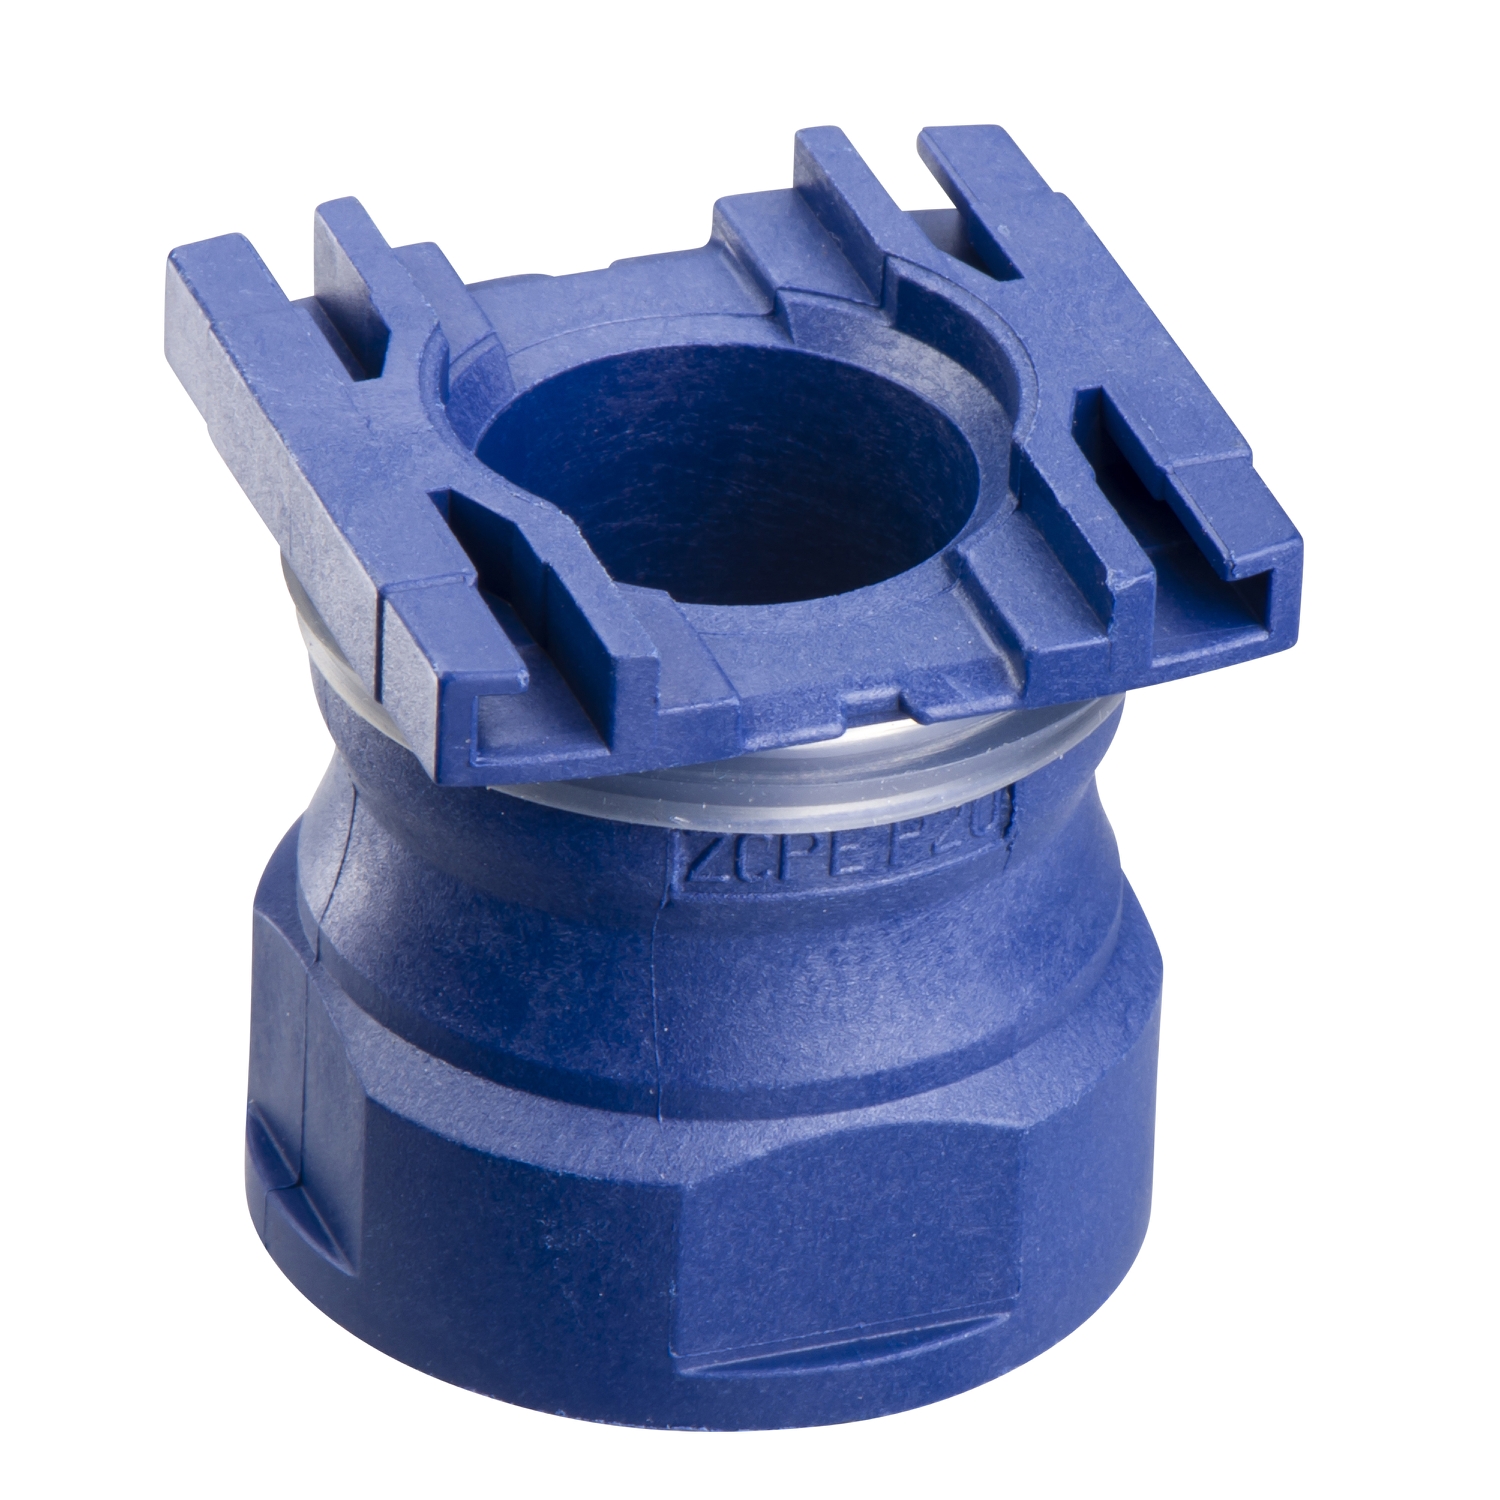 Cable gland entry, M20 x 1.5, for limit switch, plastic body